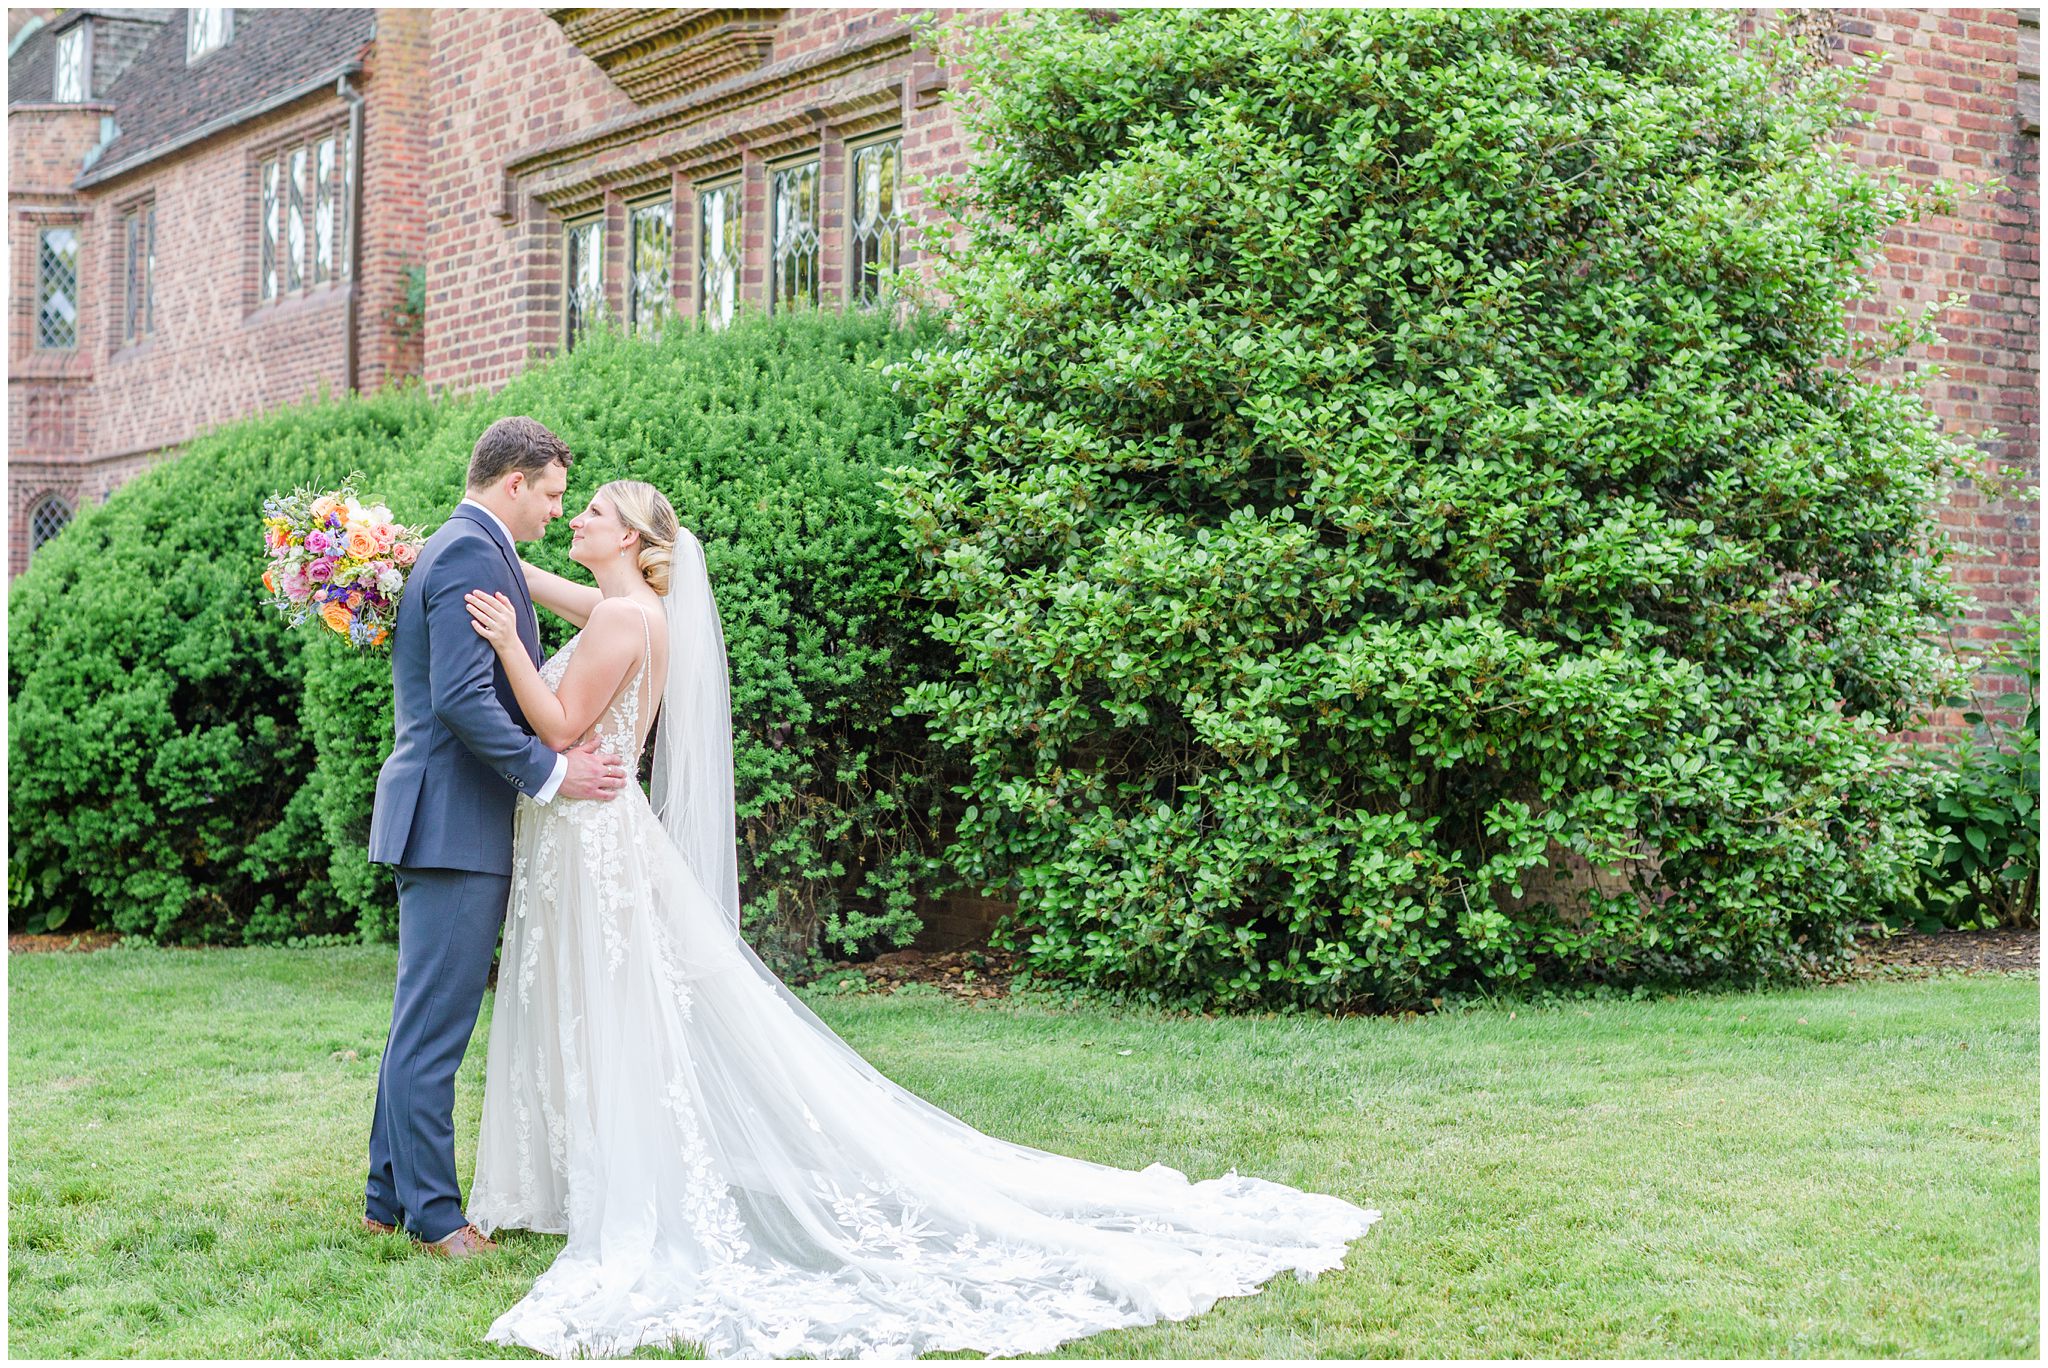 Nicole and Dylan | A Colorful, Story-Inspired Aldie Mansion Wedding in ...